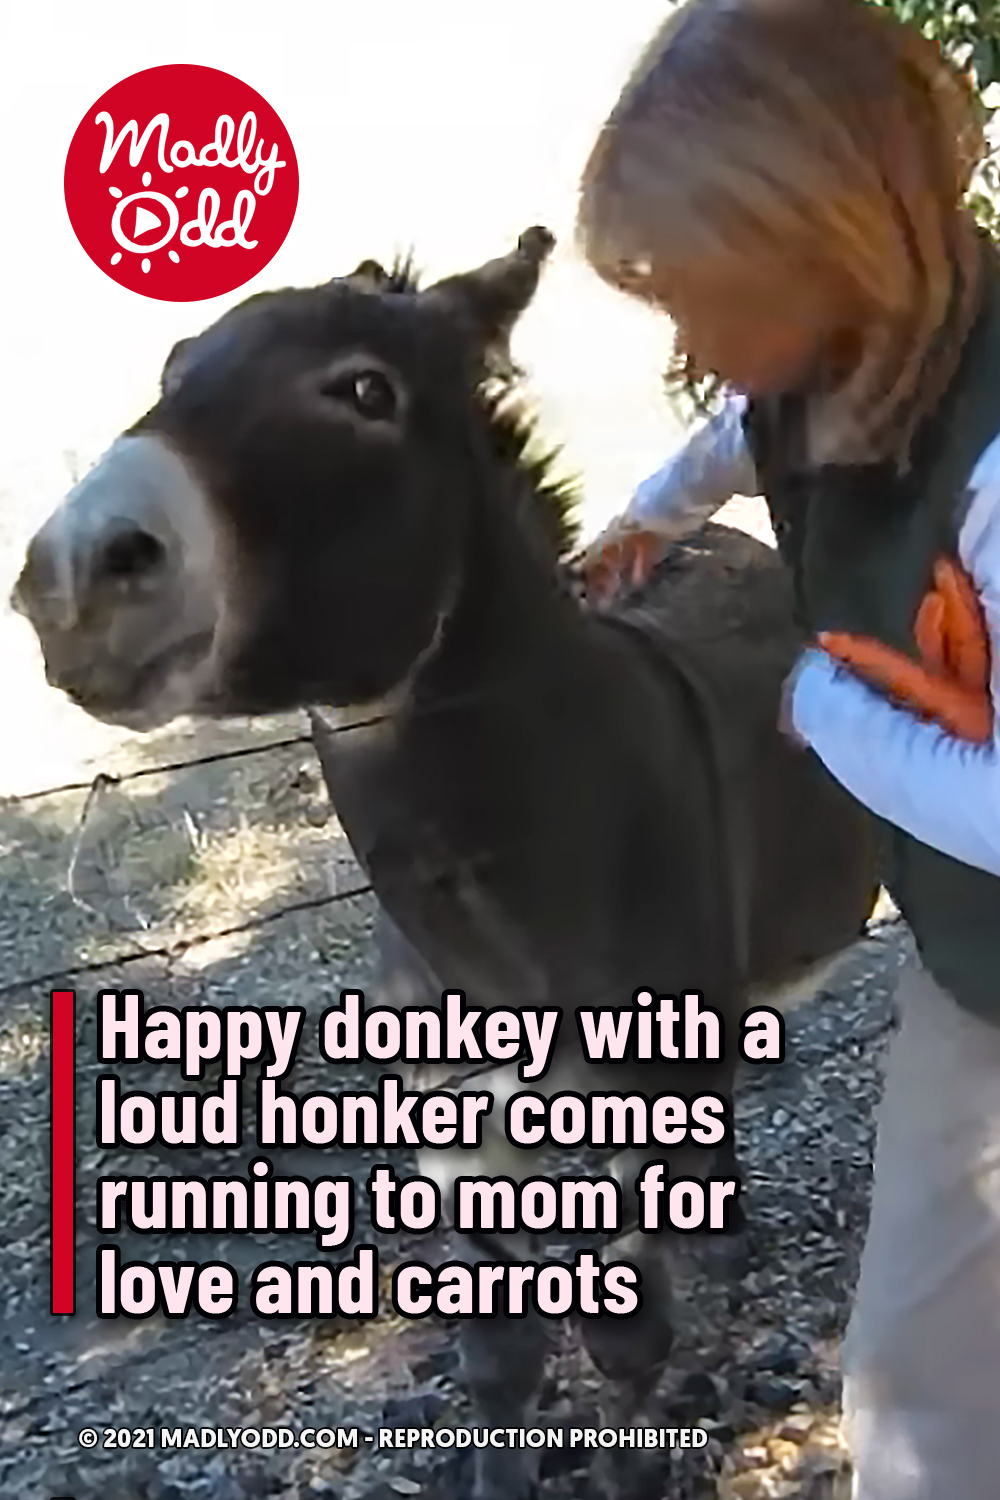 Happy donkey with a loud honker comes running to mom for love and carrots